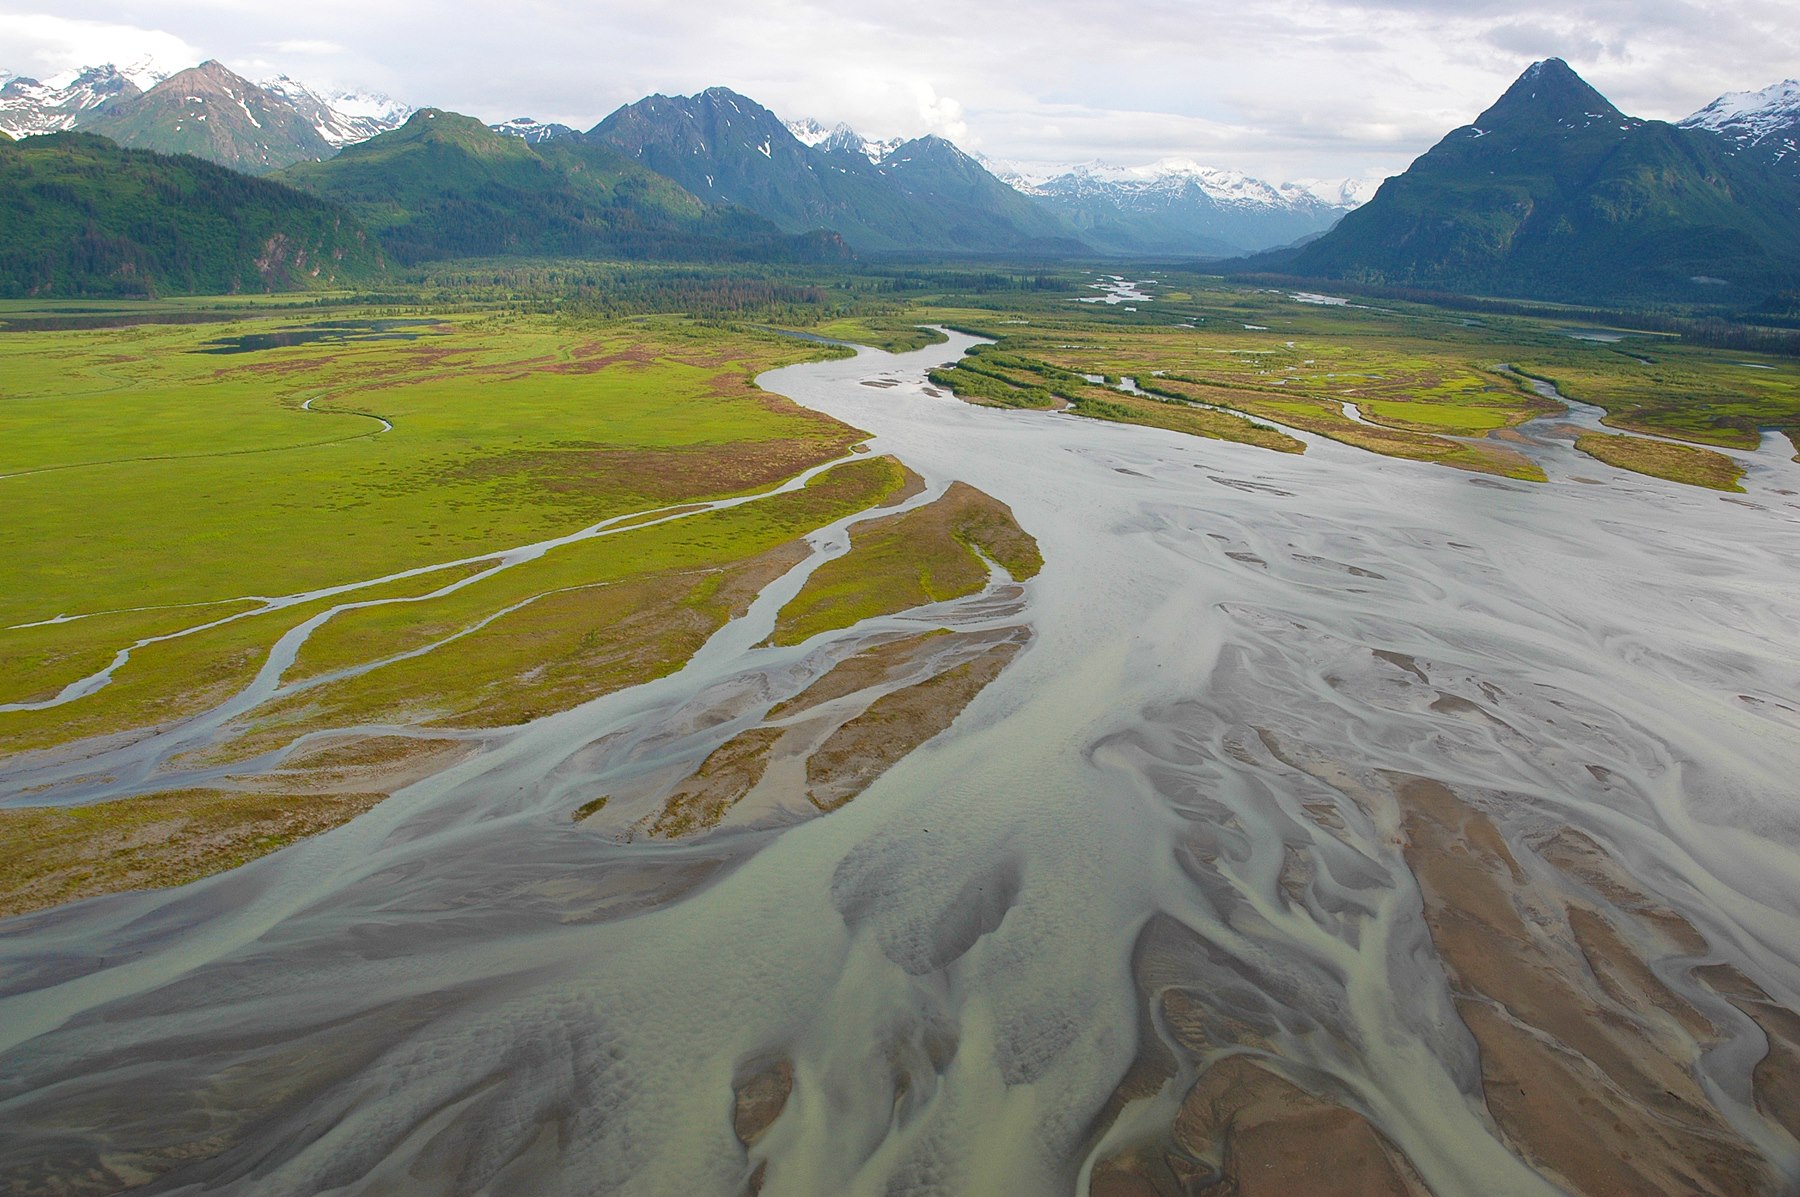 Photo of a river delta flowing into tidal flats surrounded by green salt marshes and mountains.